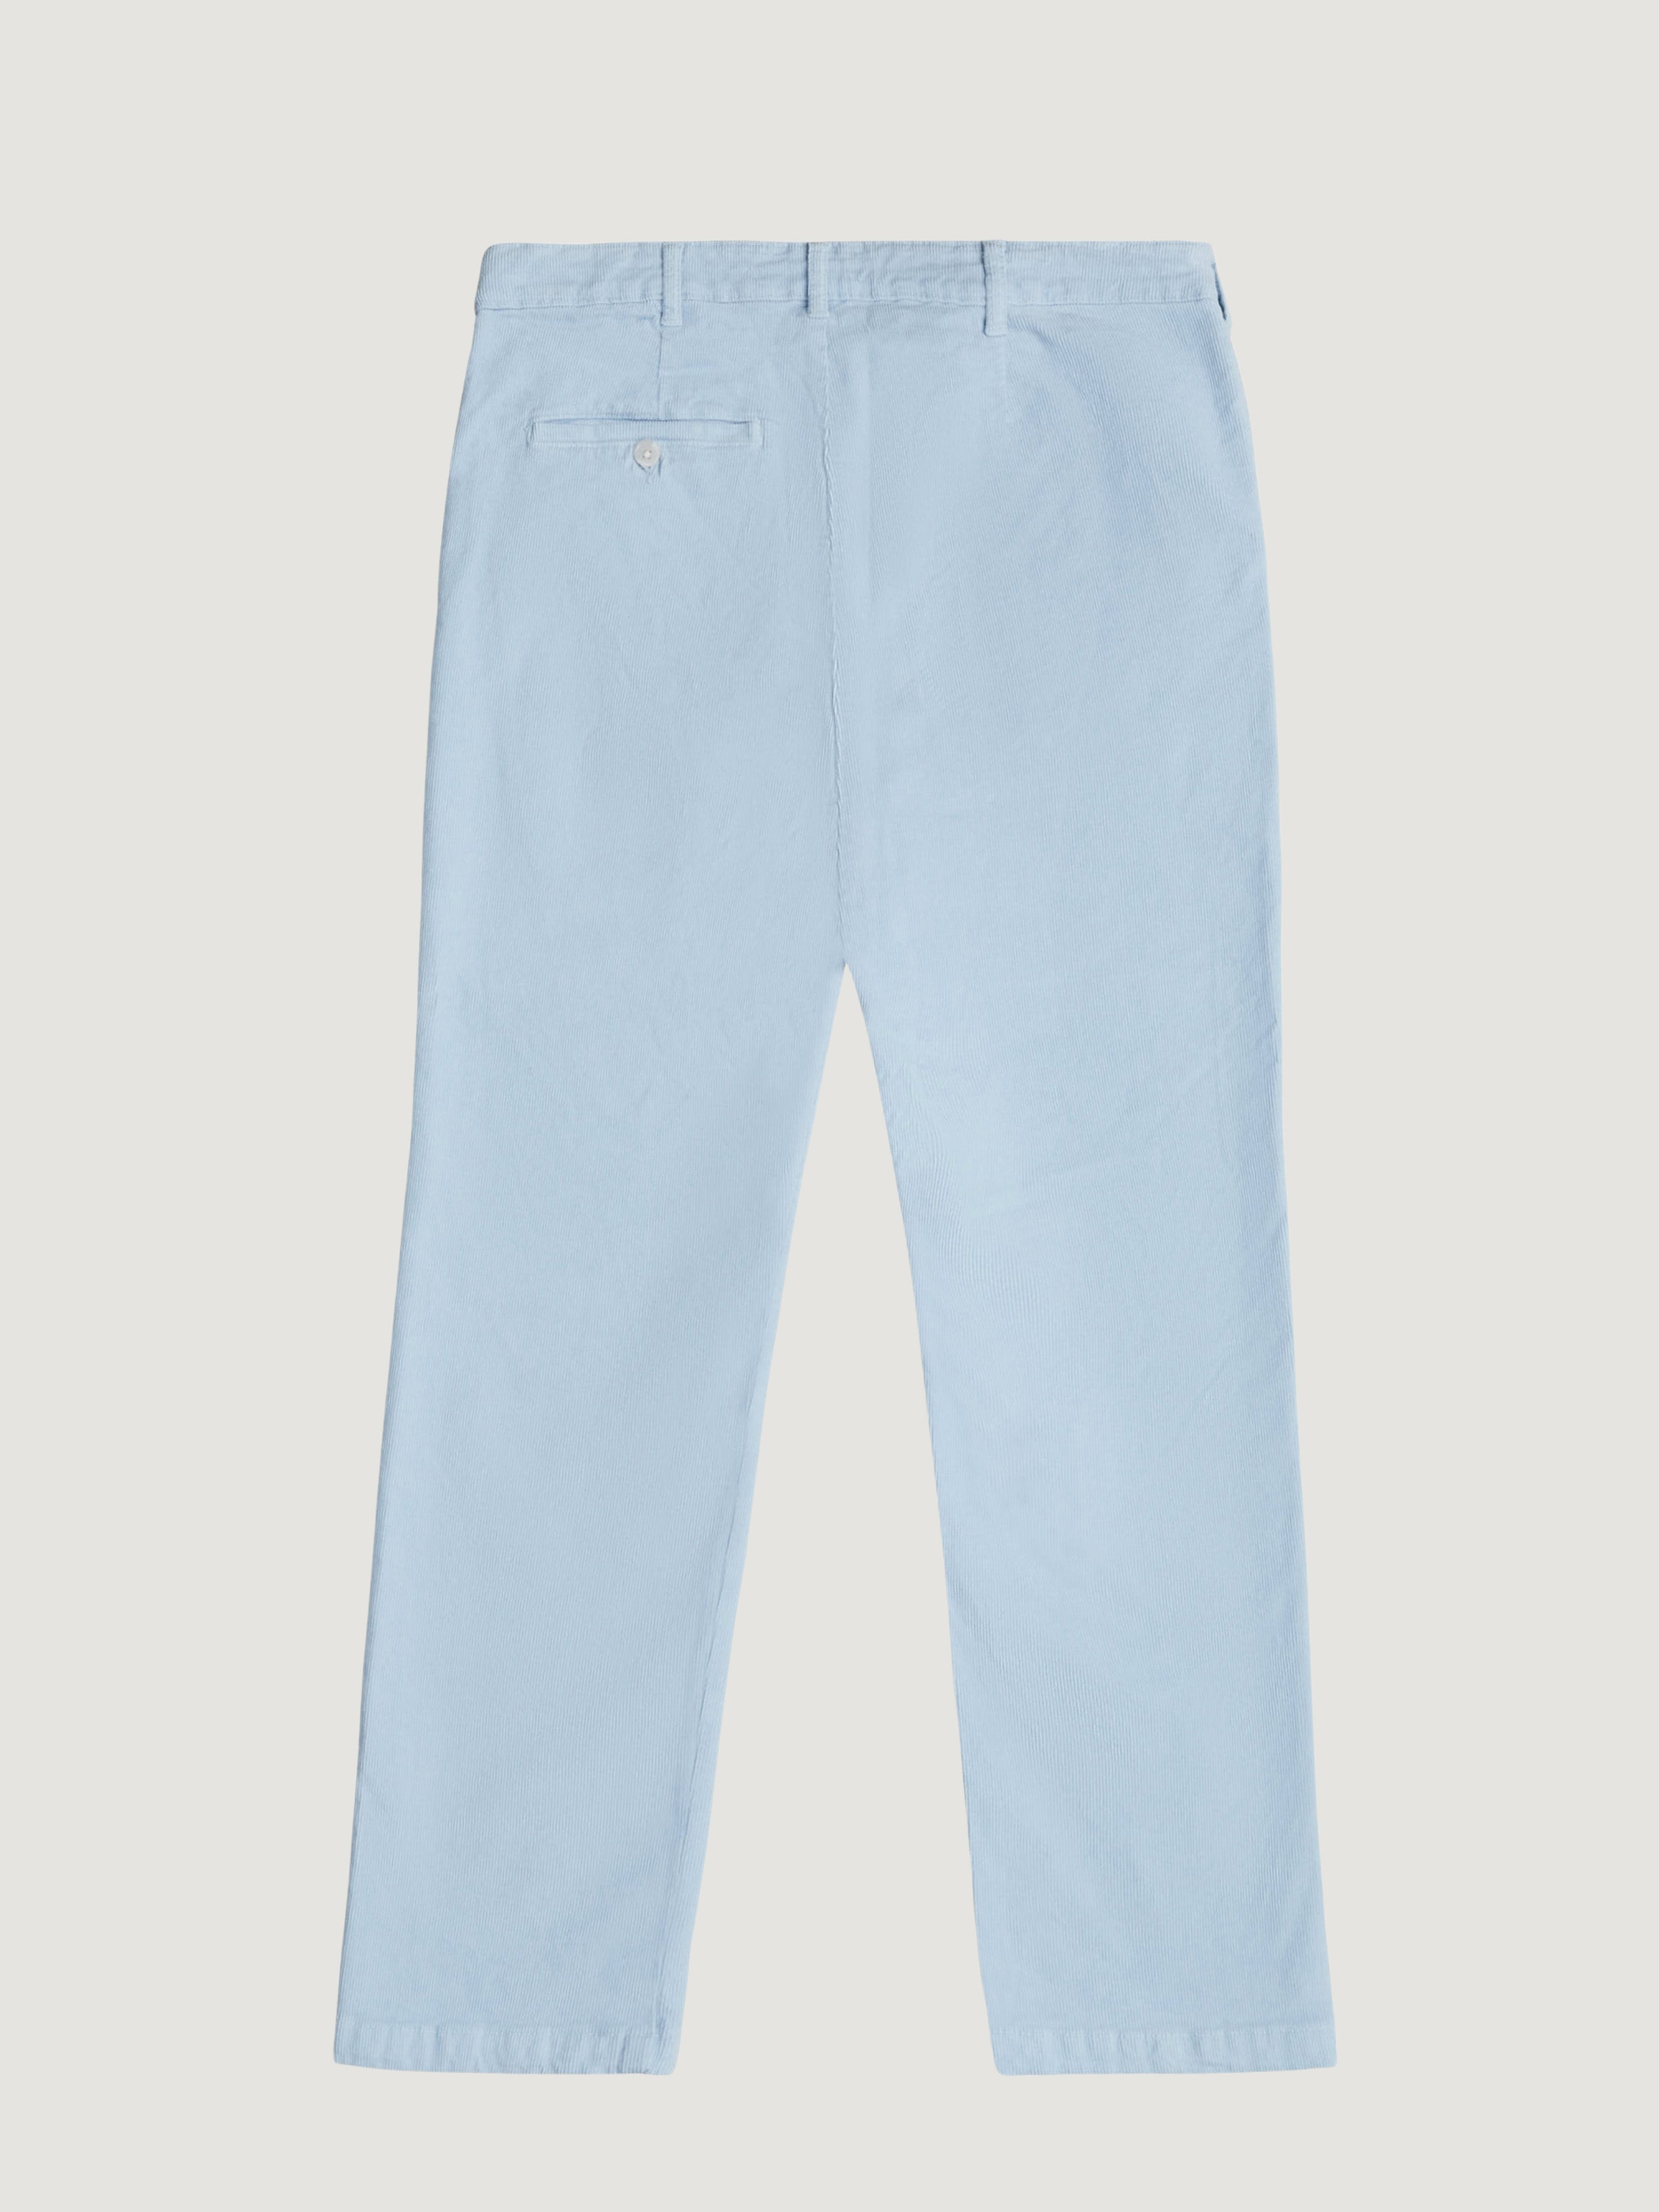 CORDUROY PANTS BABY BLUE - ATTODE